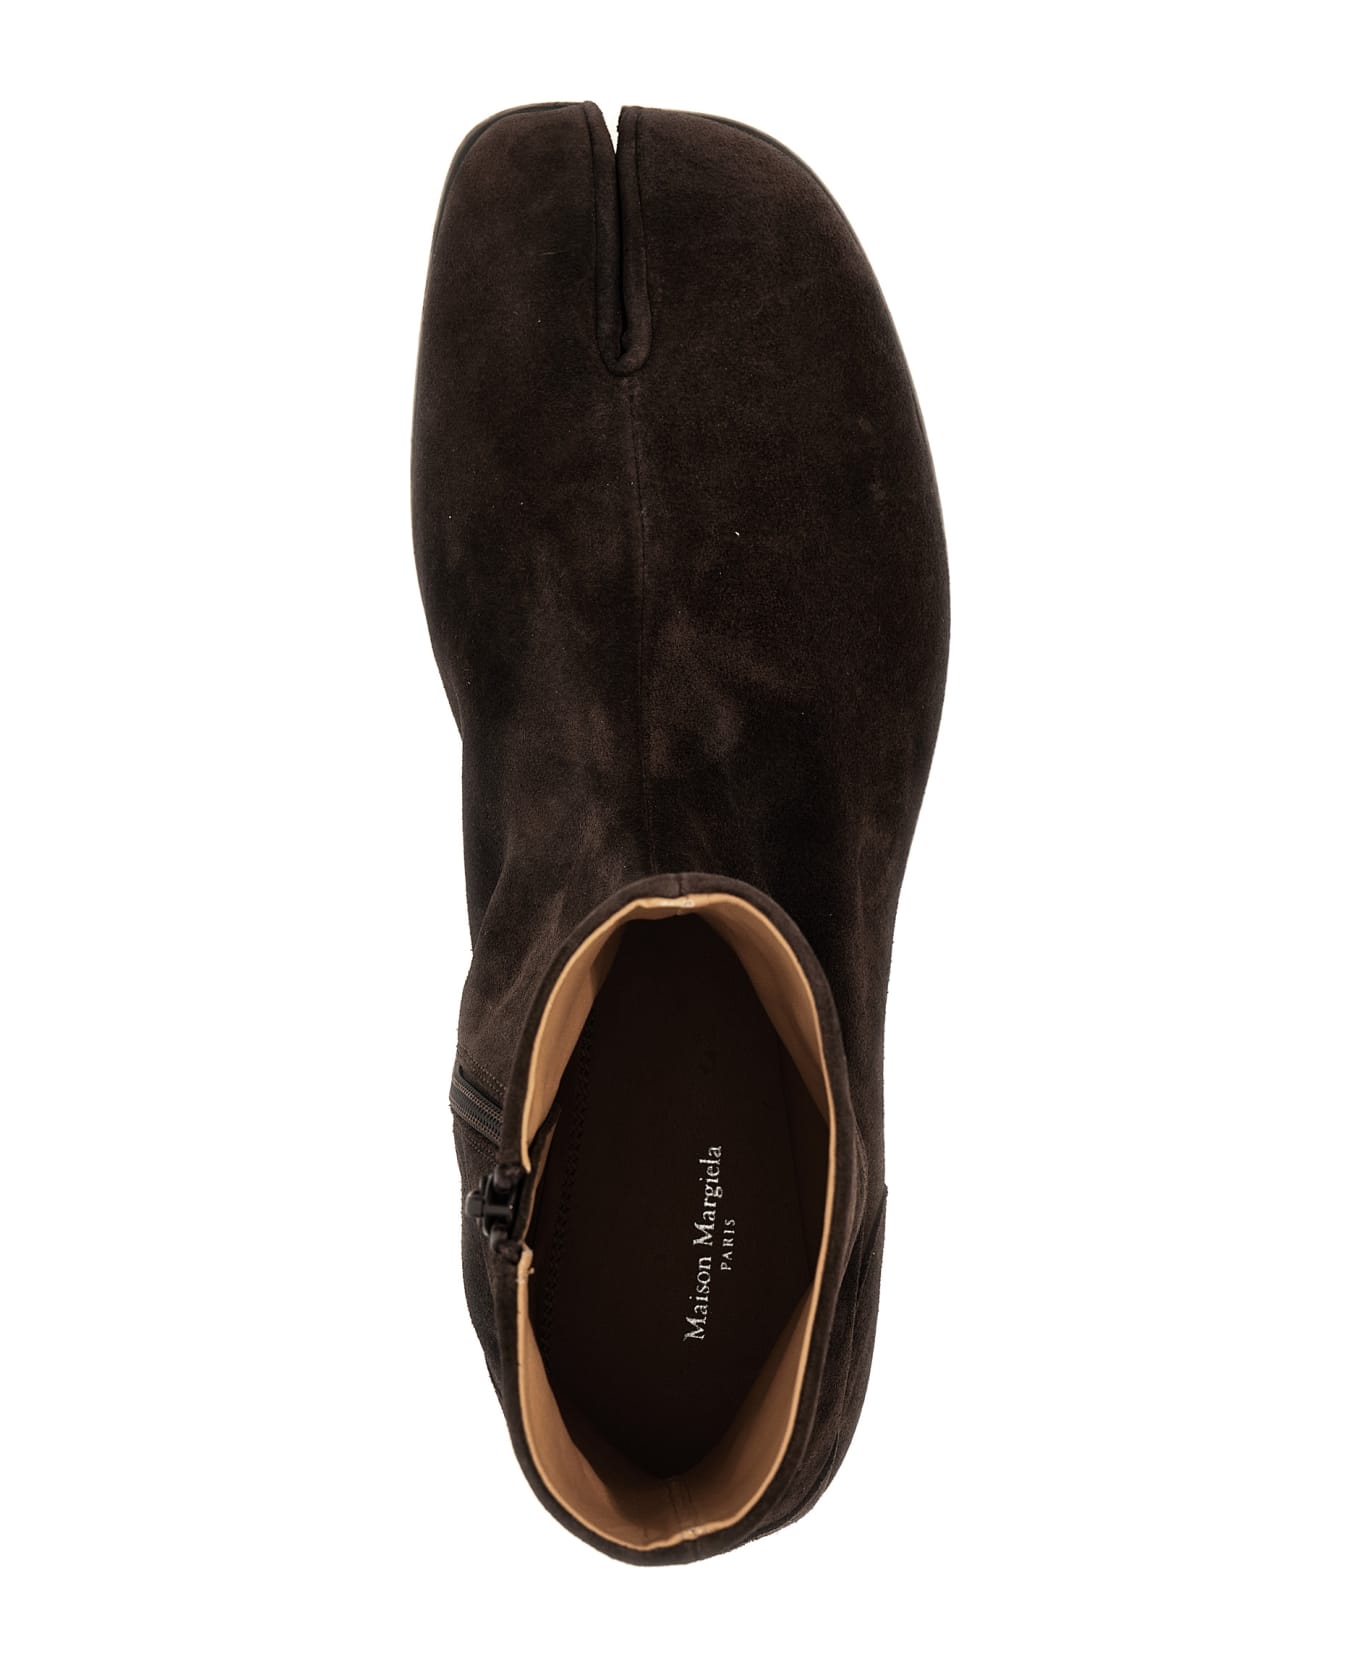 Maison Margiela 'tabi' Ankle Boots - Brown ブーツ